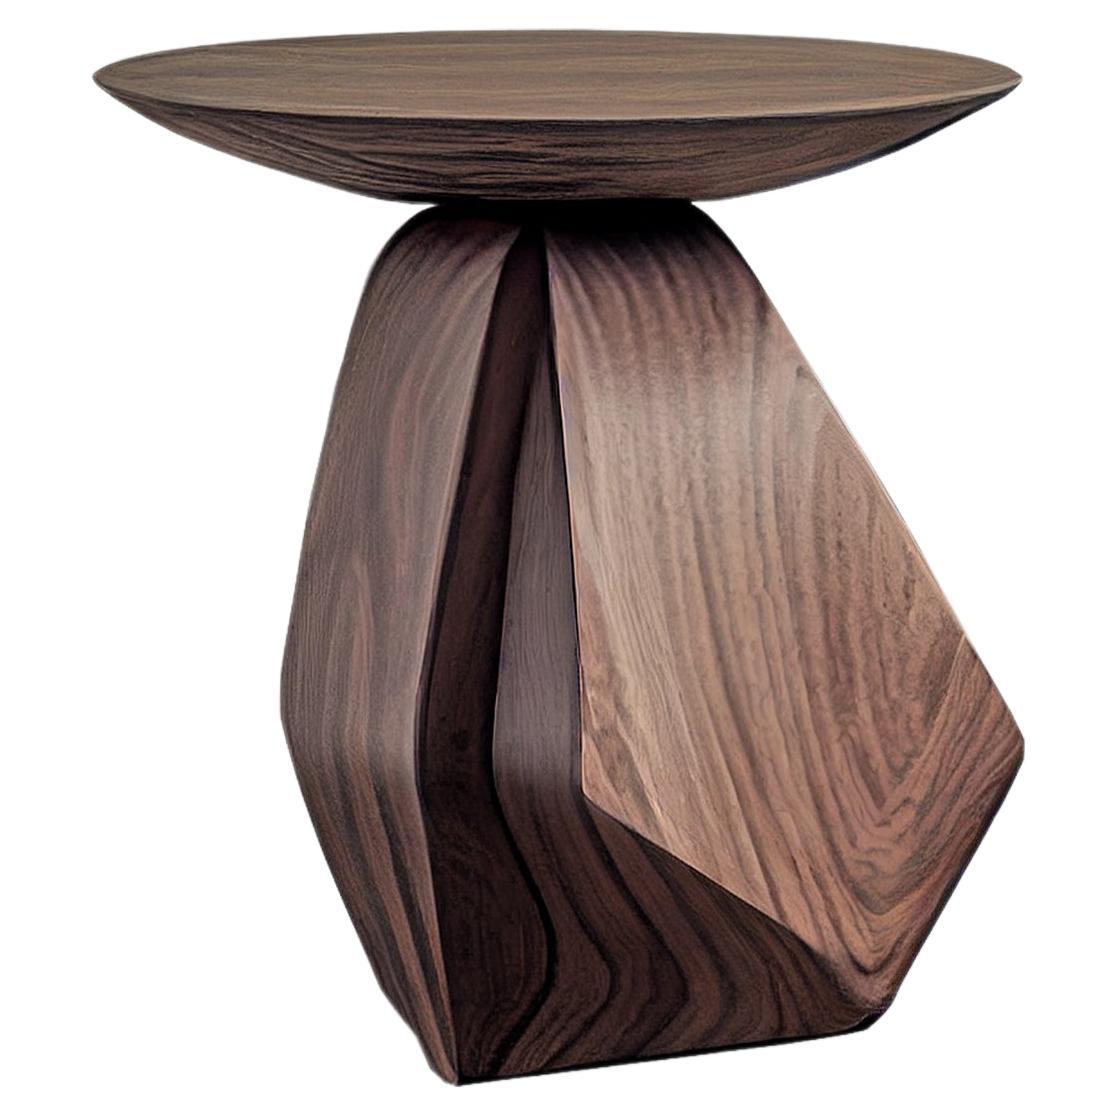 Organic Shape Solace 7: Circular Solid Walnut Side Table, Art Meets Function For Sale